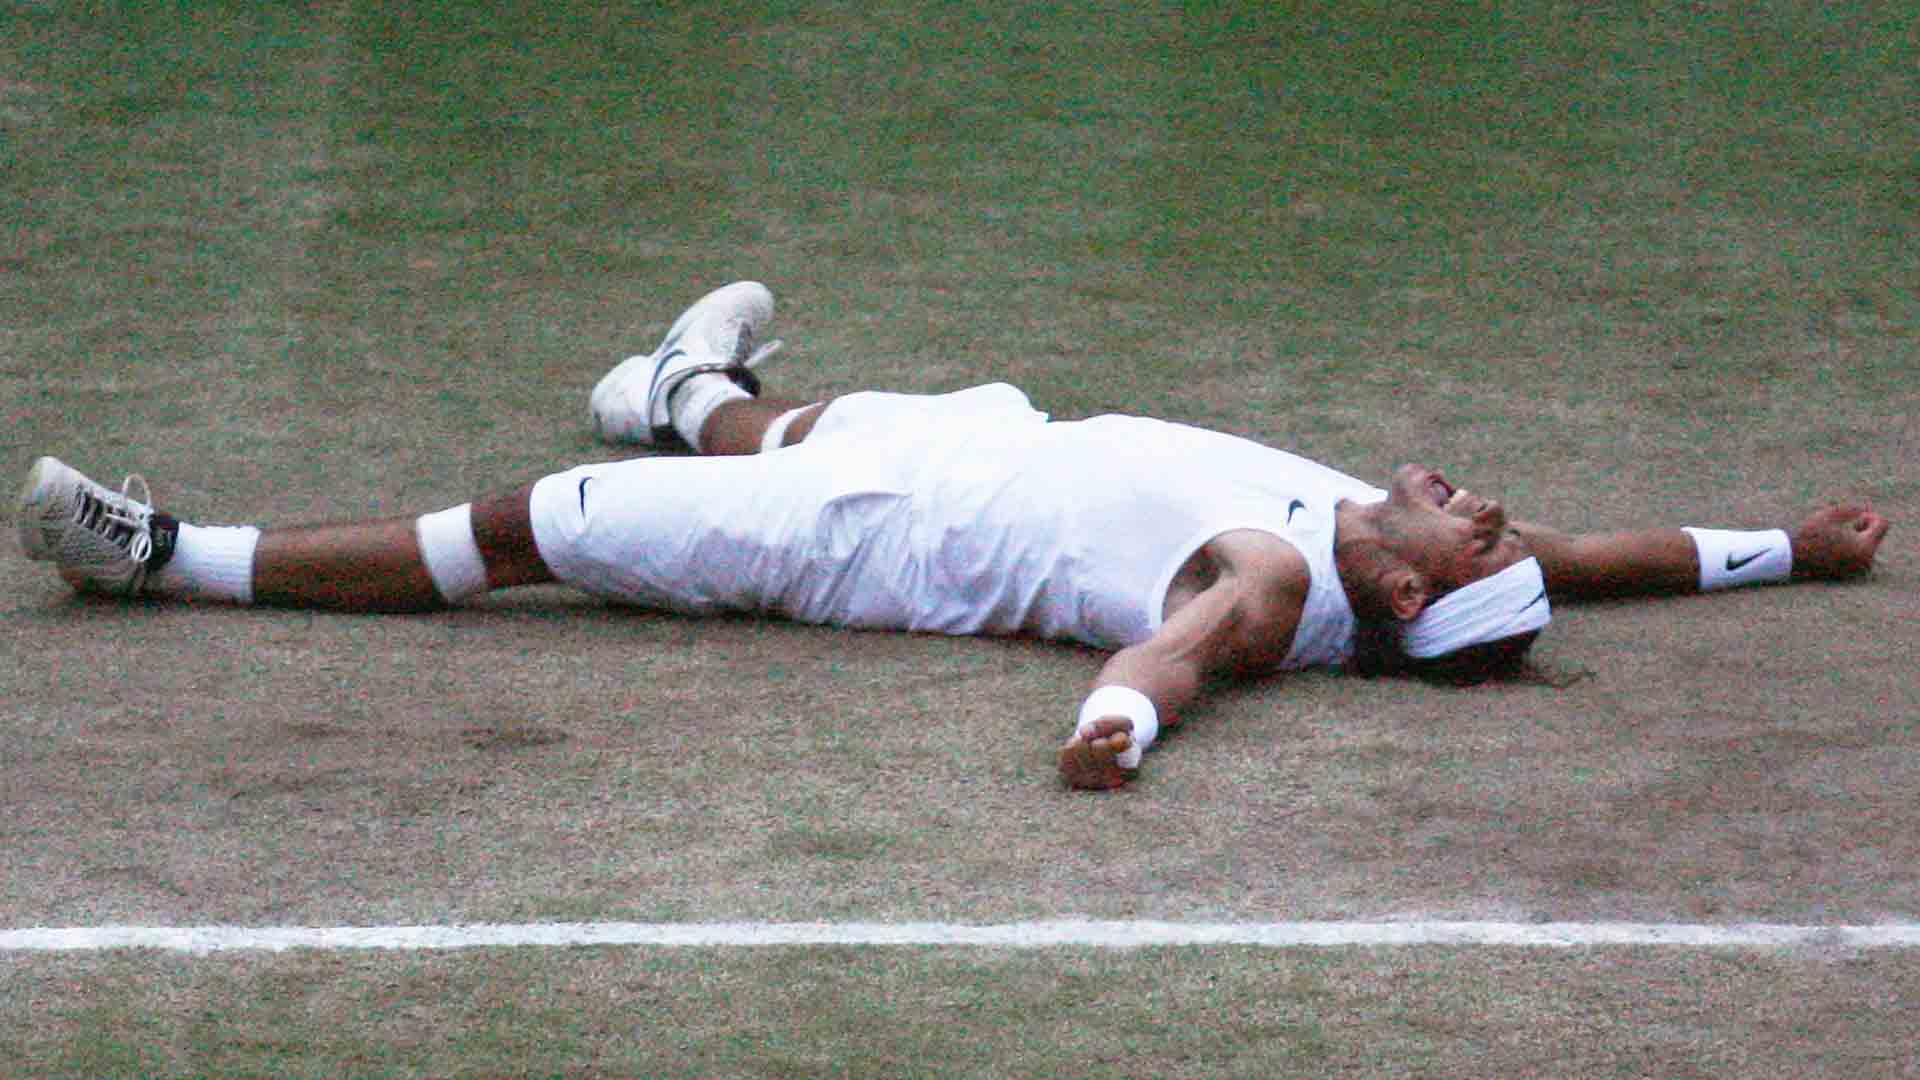 Rafael Nadal defeats Roger Federer in five sets to capture his maiden Wimbledon title in 2008.